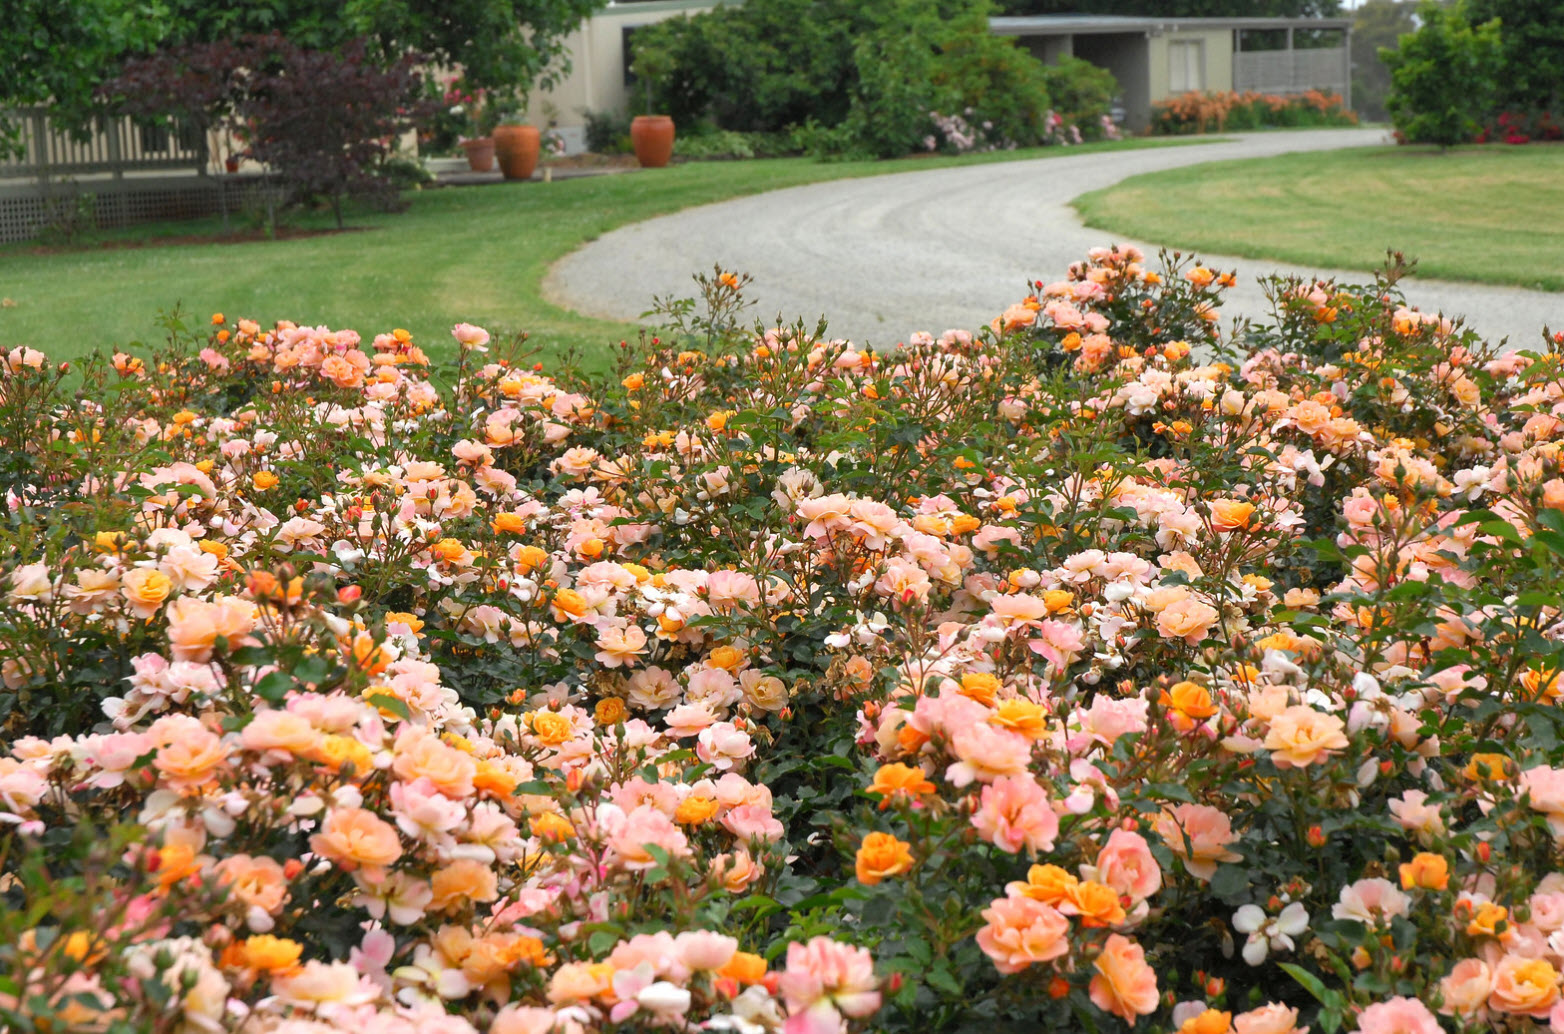 1649071742 311 Discover the most important tips for caring for ground cover - Discover the most important tips for caring for ground cover roses